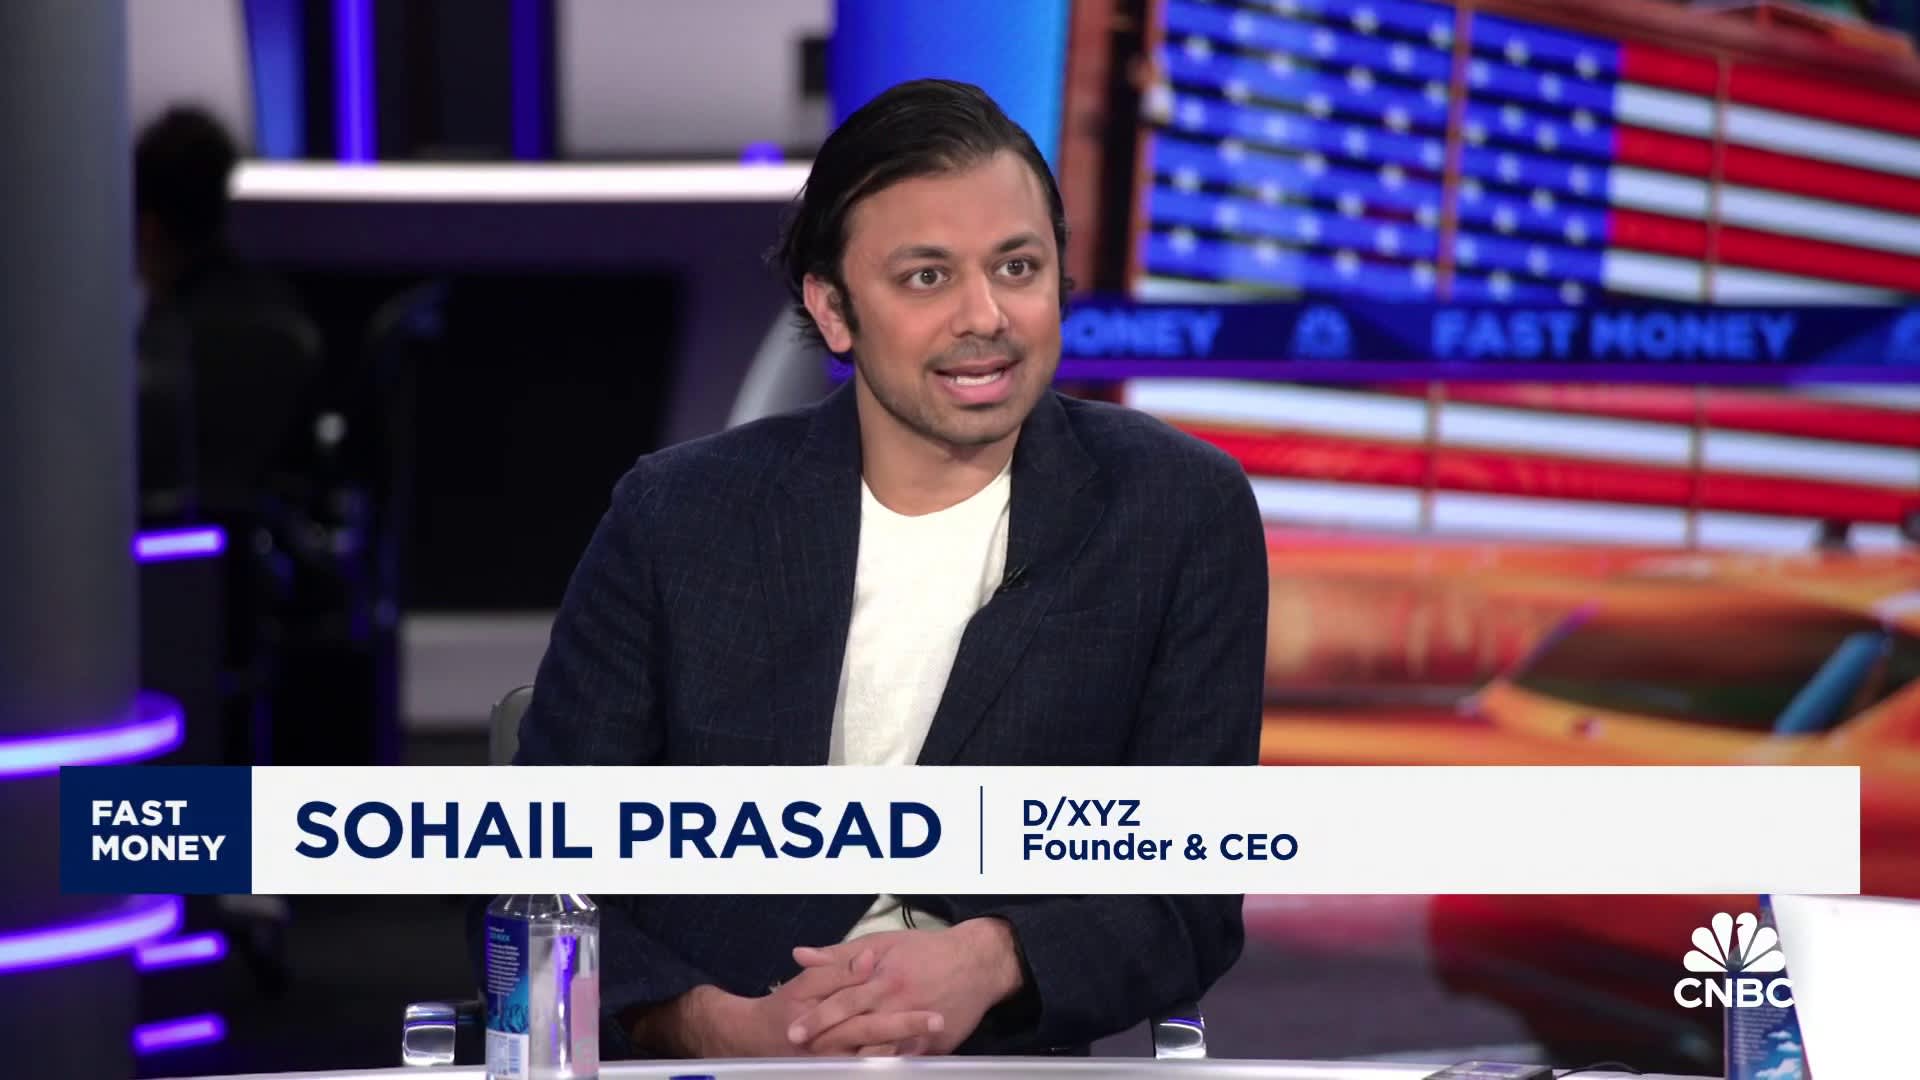 D/XYZ CEO dives into launch of new fund to invest in private tech [Video]